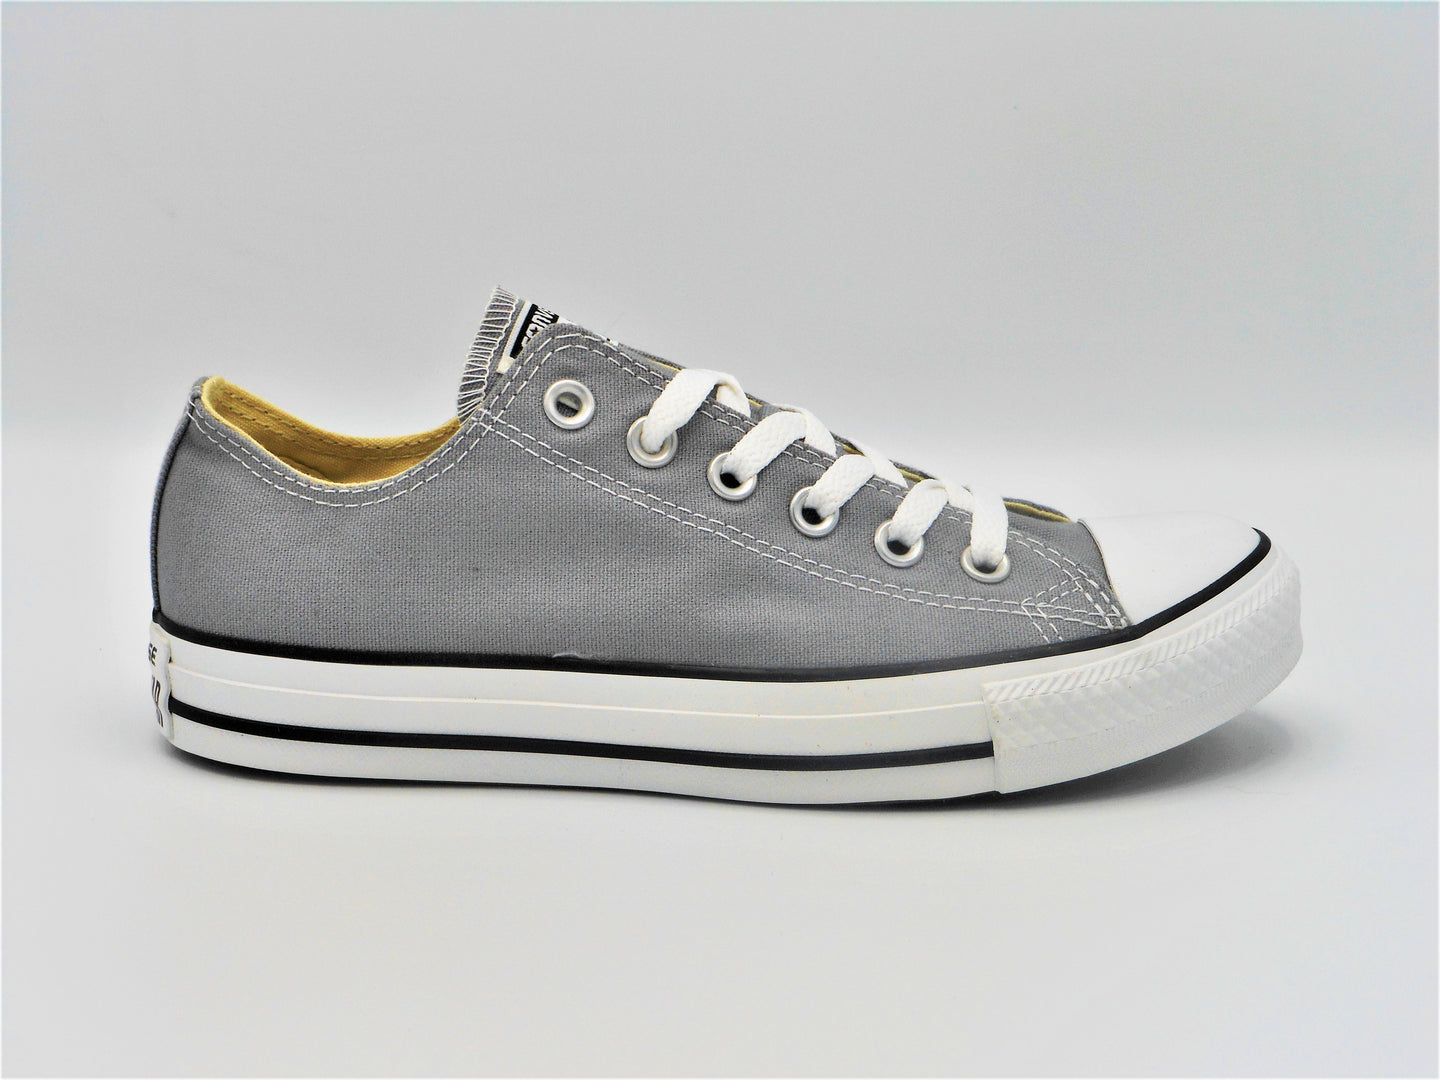 CONVERSE All Star Ox charcoal